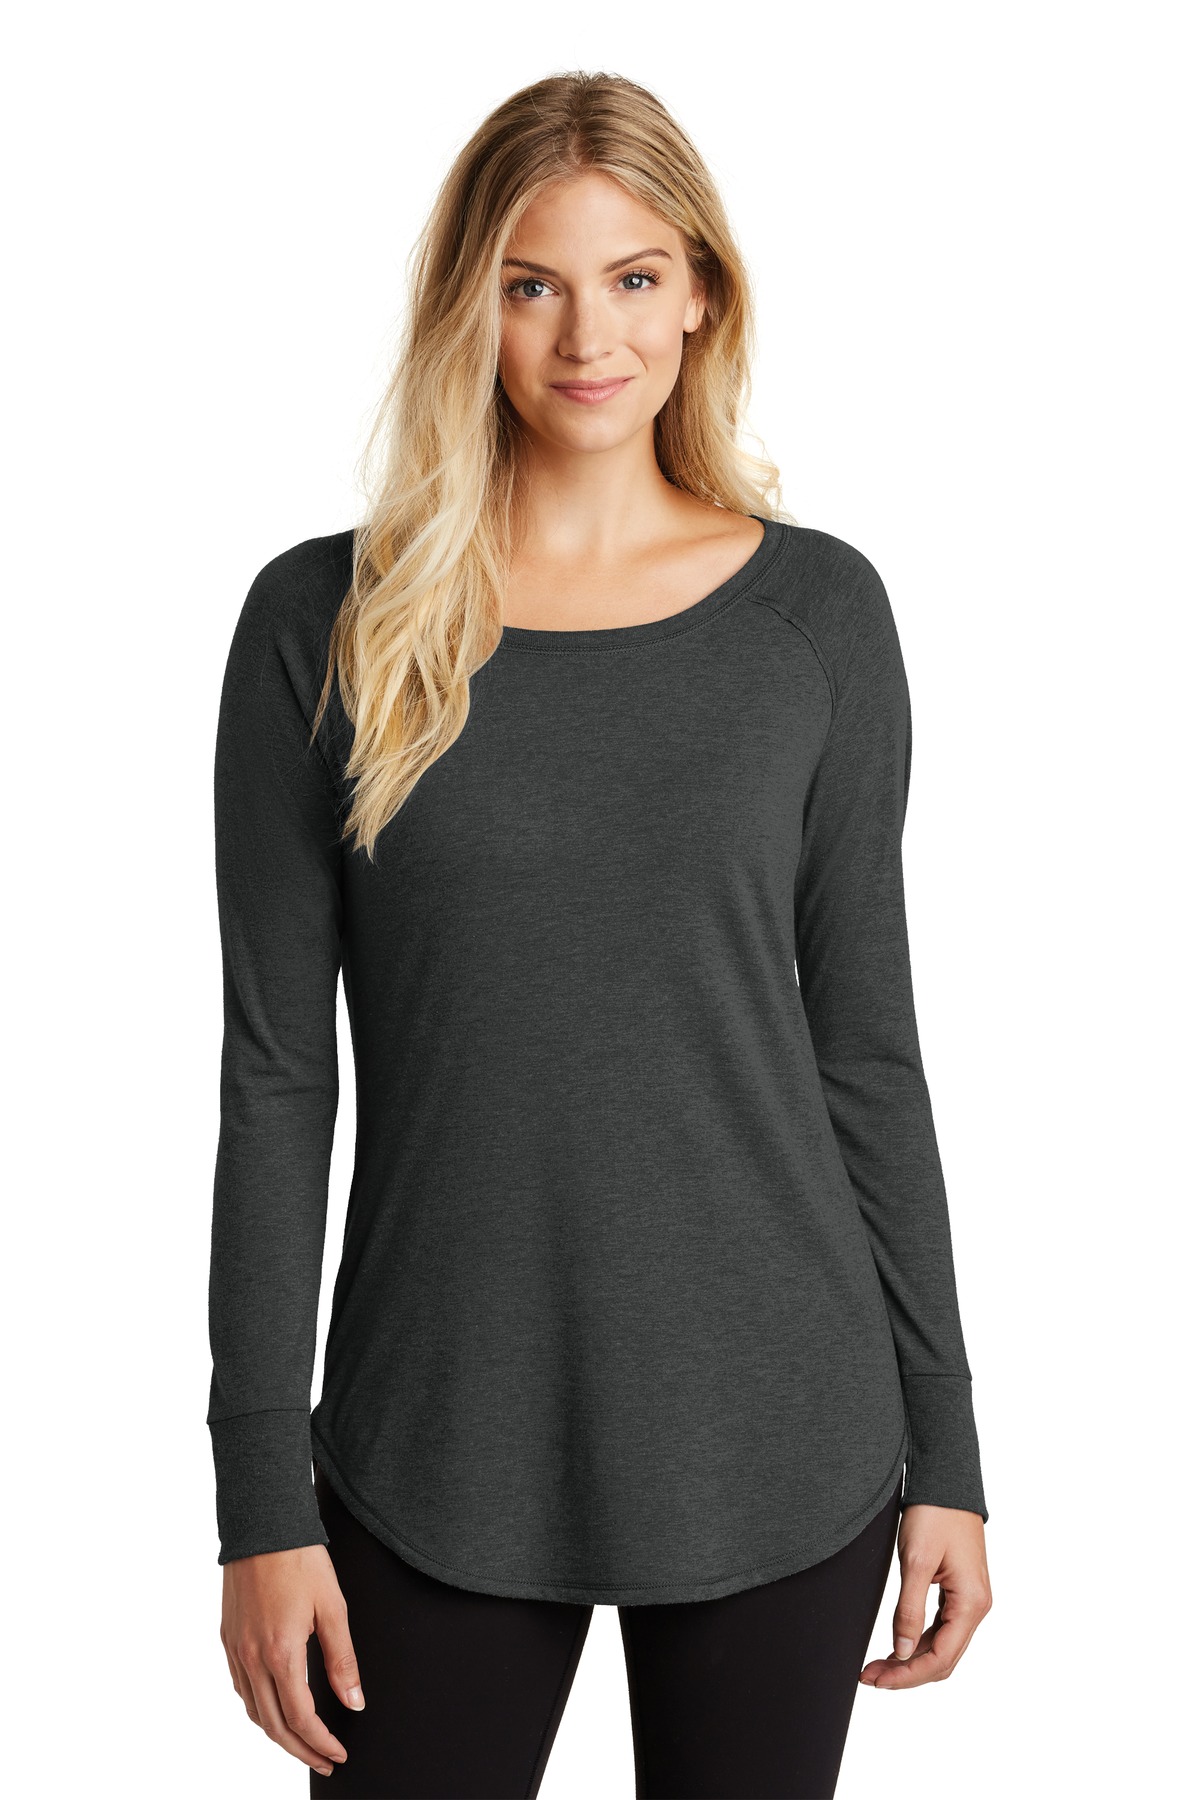 District DT132L Women's Perfect Tri ® Long Sleeve Tunic Tee–Black Frost  (3XL)